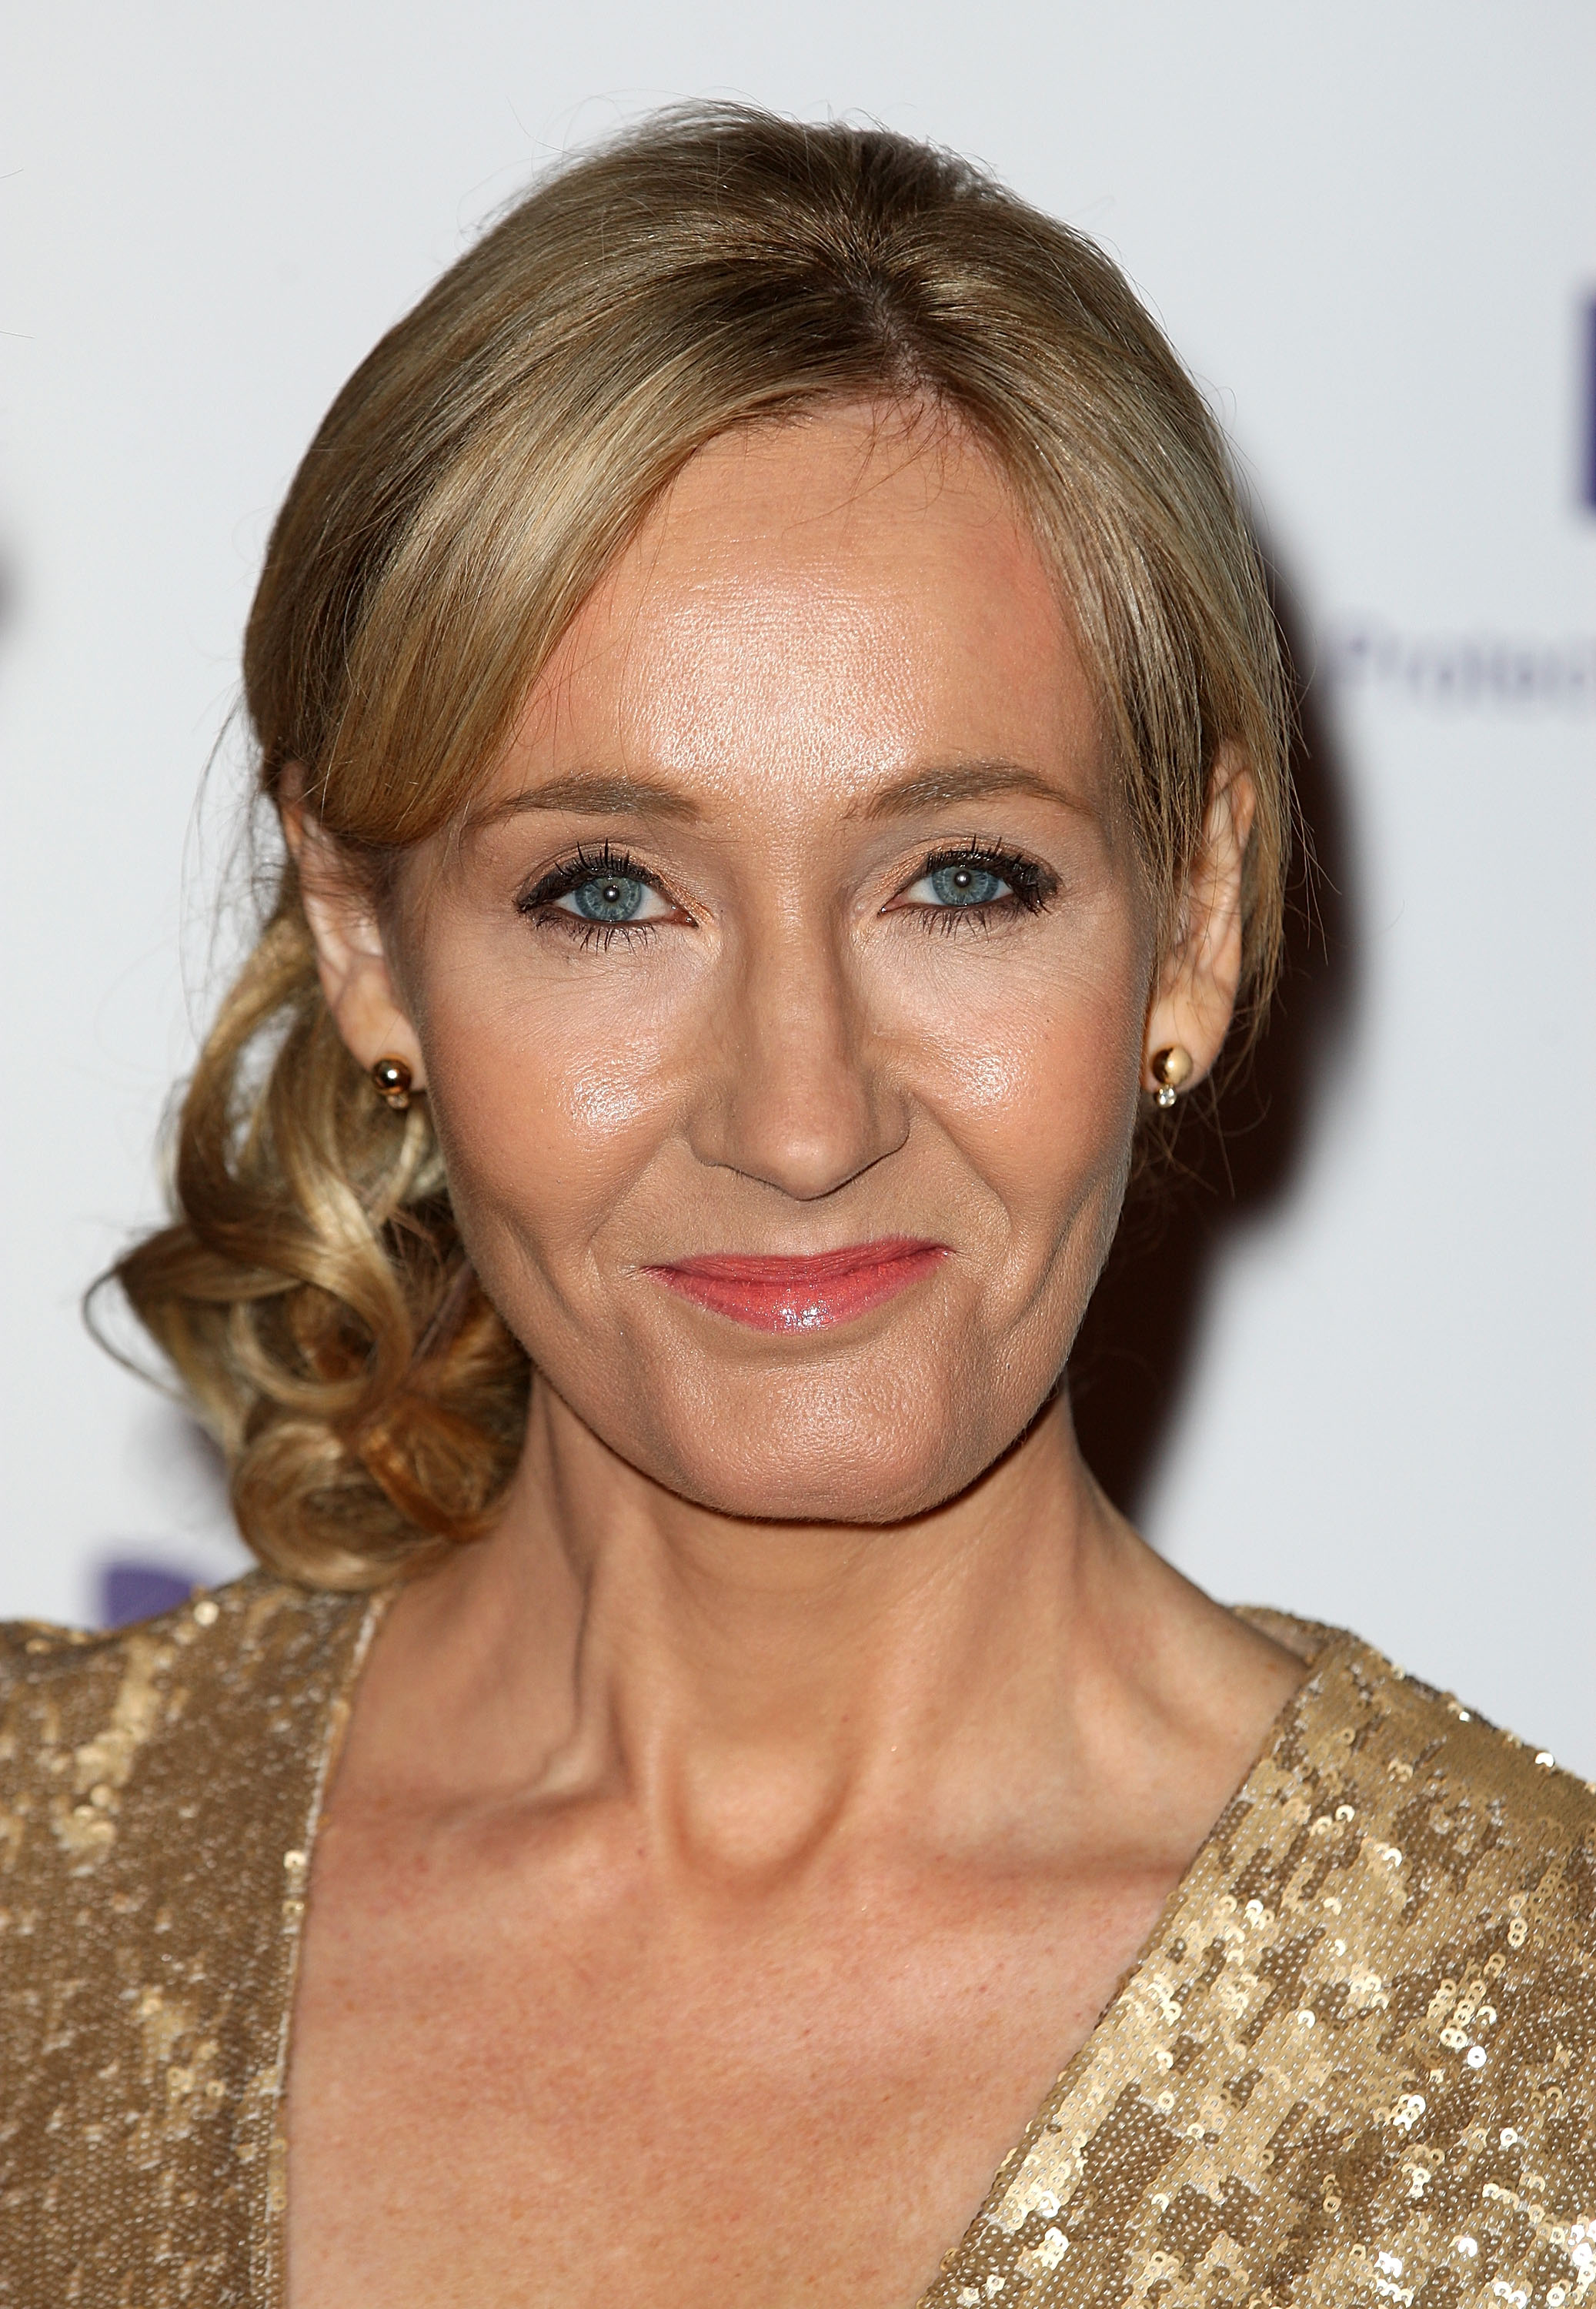 J.K. Rowling at a charity evening to raise funds for 'Lumos' in London on Nov. 9, 2013.